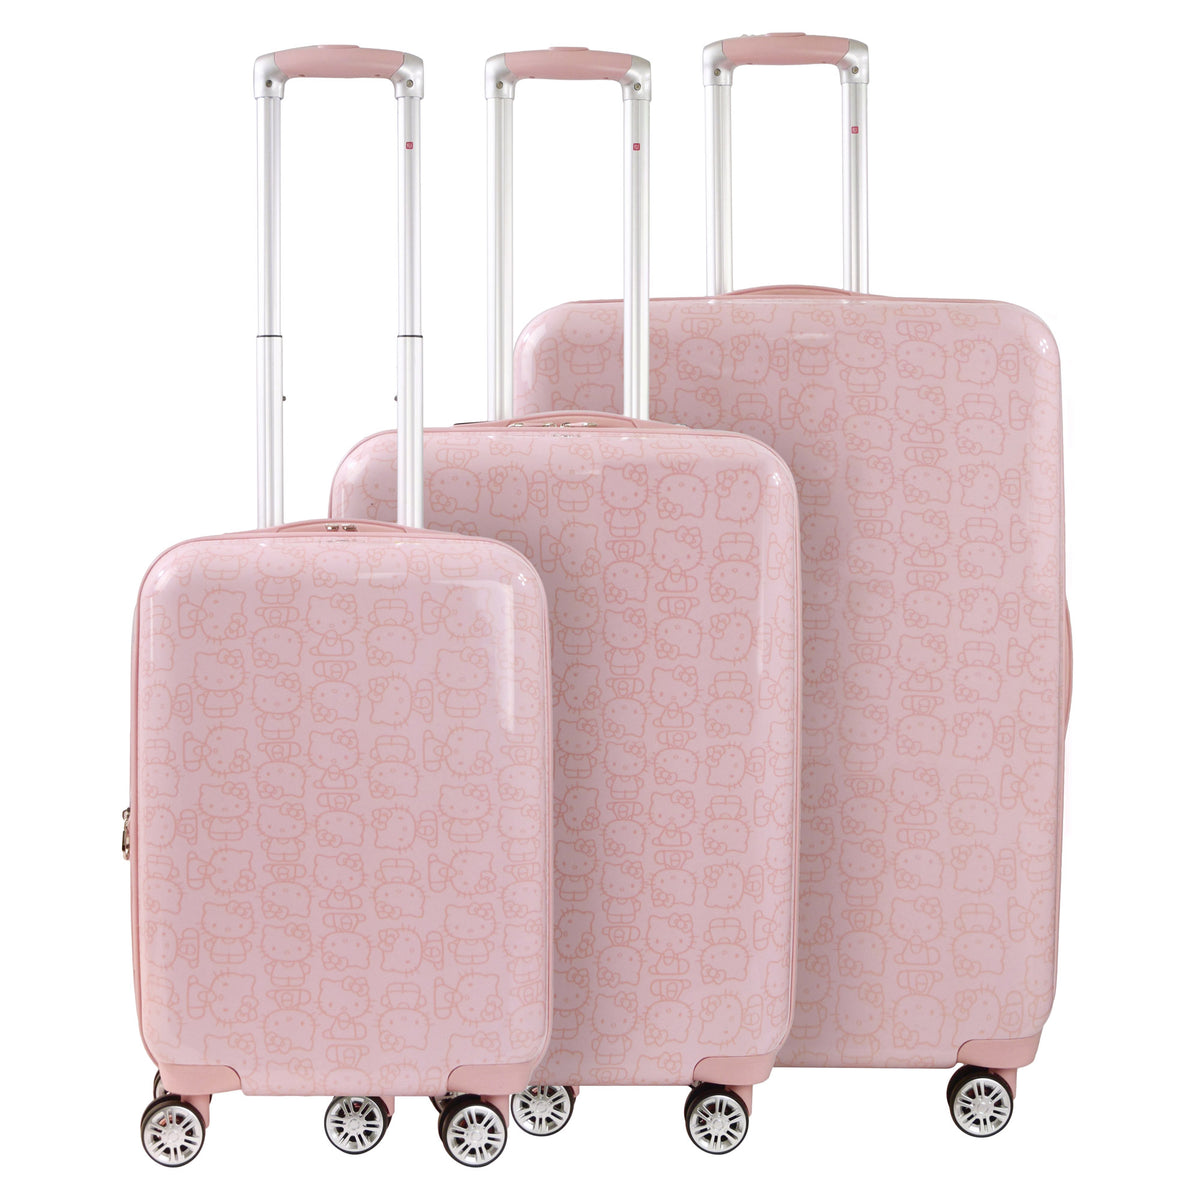 Hello Kitty x FUL Pose 3-Pc Hardshell Luggage (Pink) Travel Concept 1   